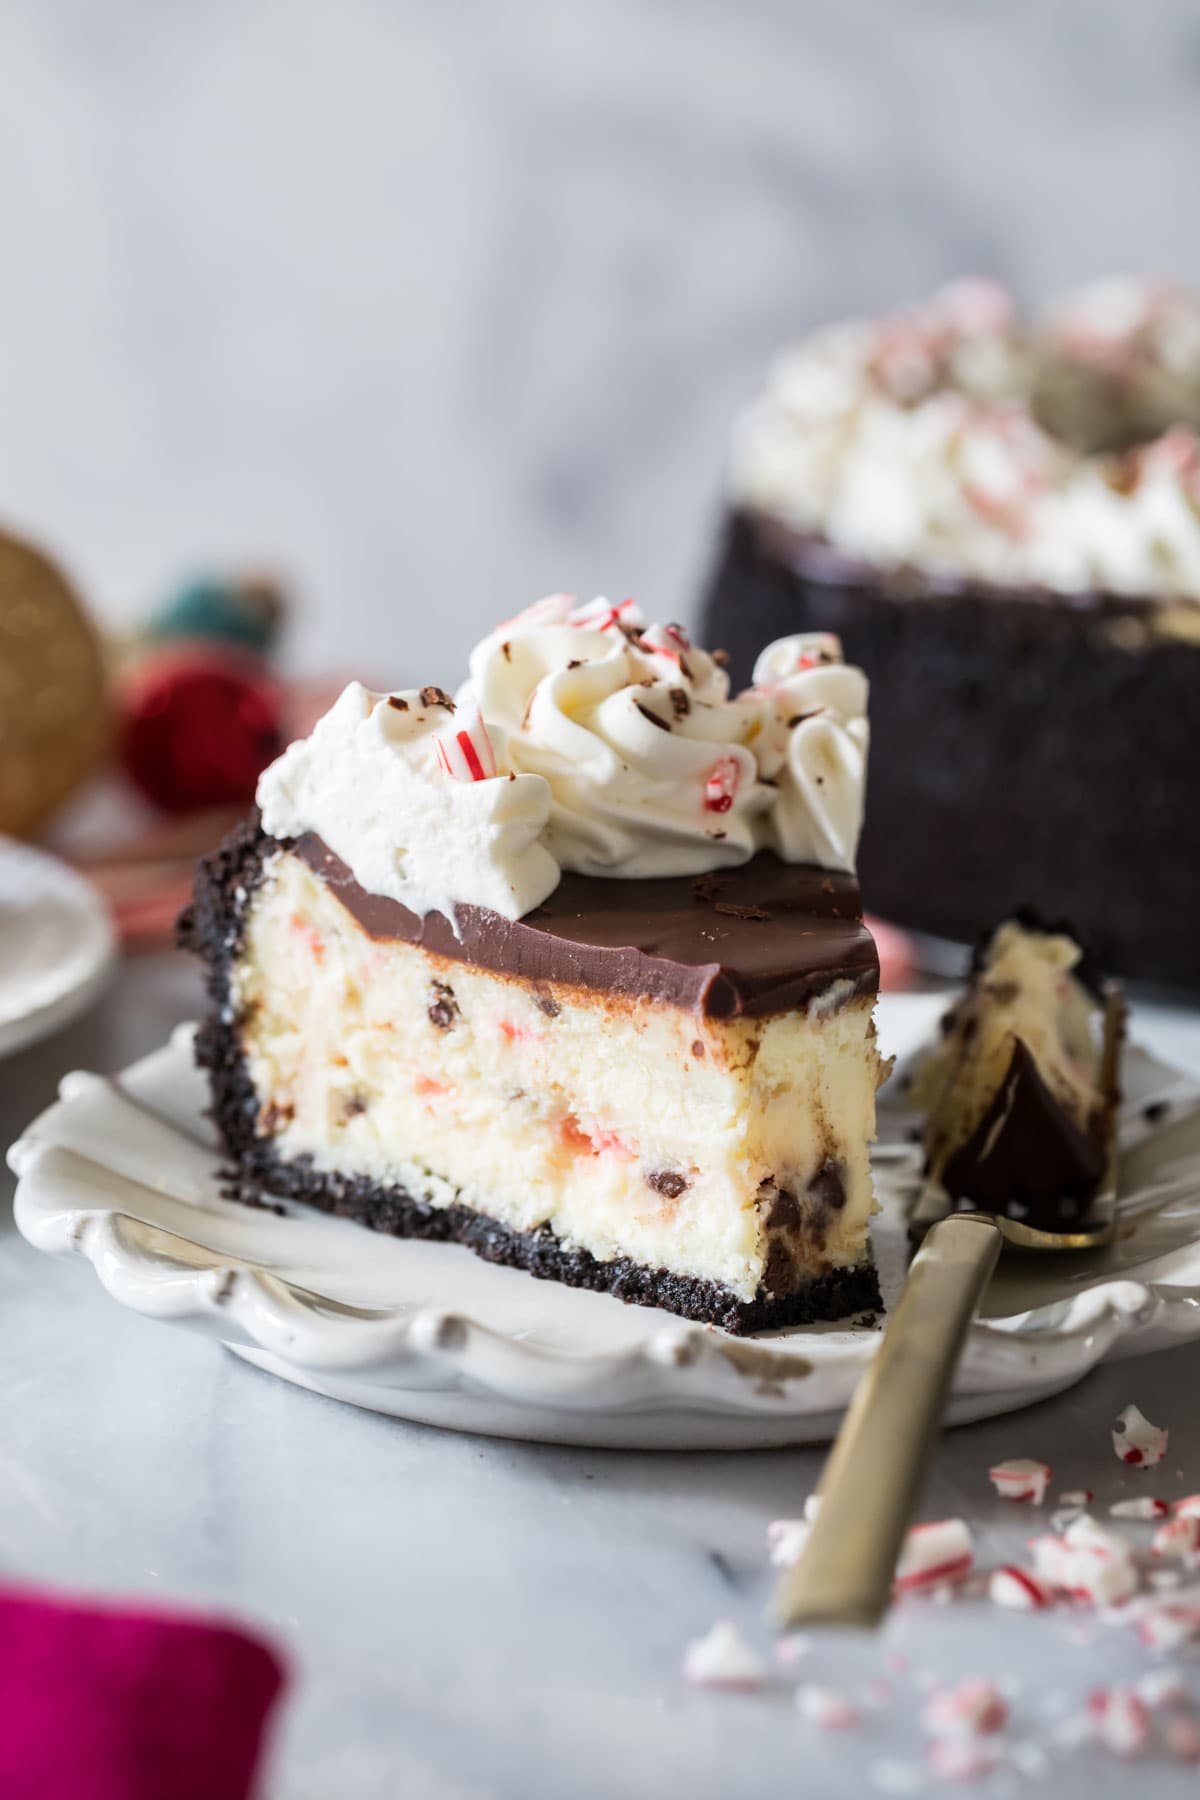 Slice of cheesecake topped with chocolate ganache, whipped cream, and crushed peppermint candy missing one bite.